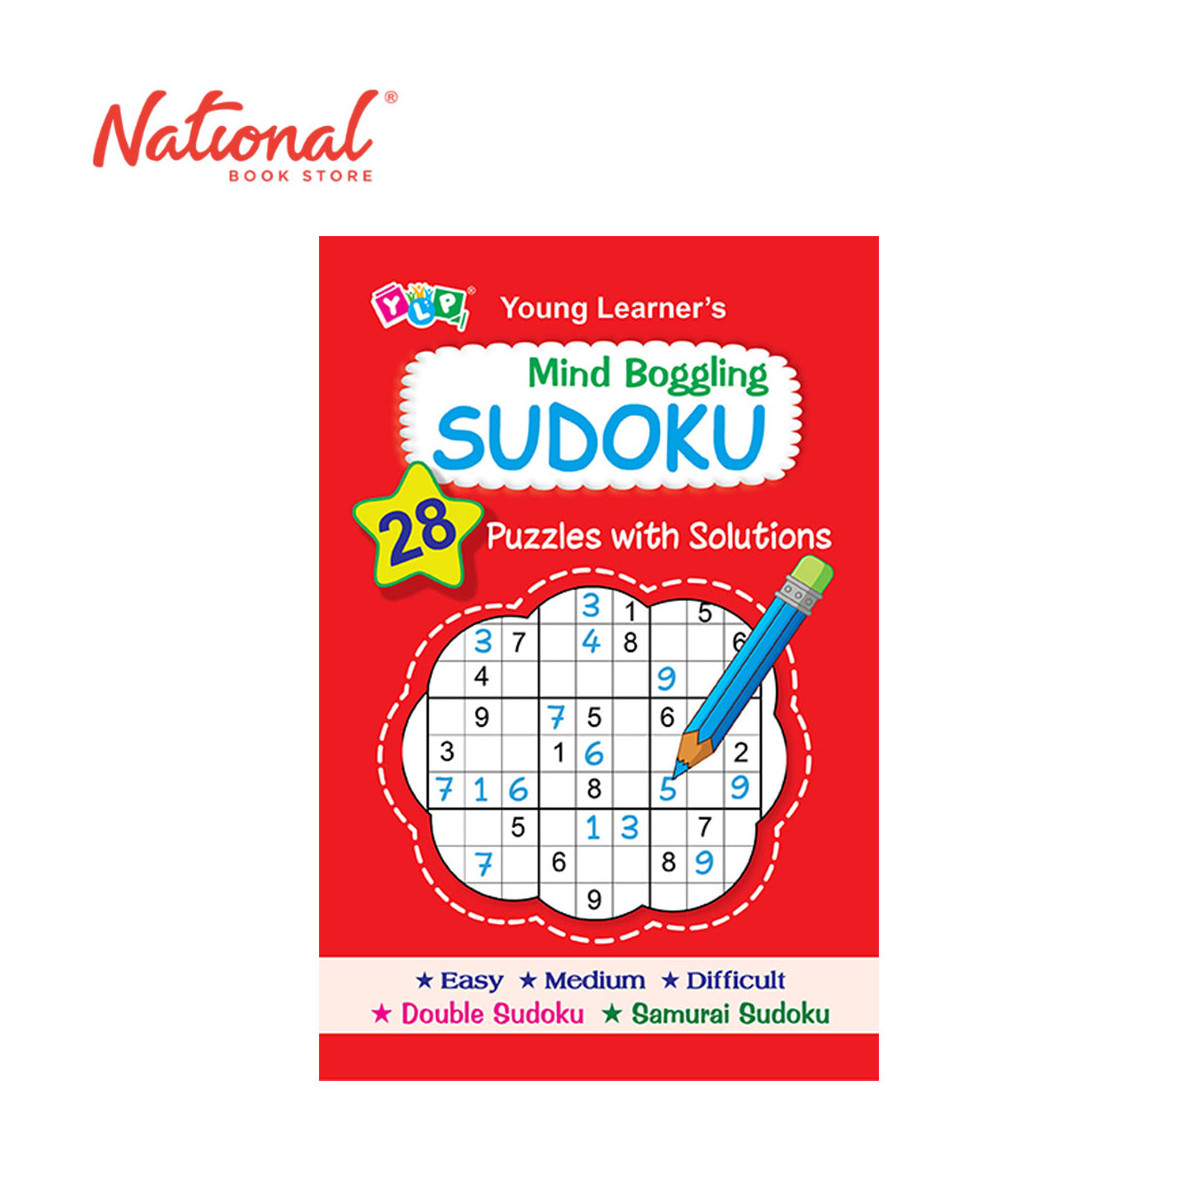 Young Learner's: Mind Boggling Sudoku - Trade Paperback - Hobbies for Kids - Puzzles for Kids